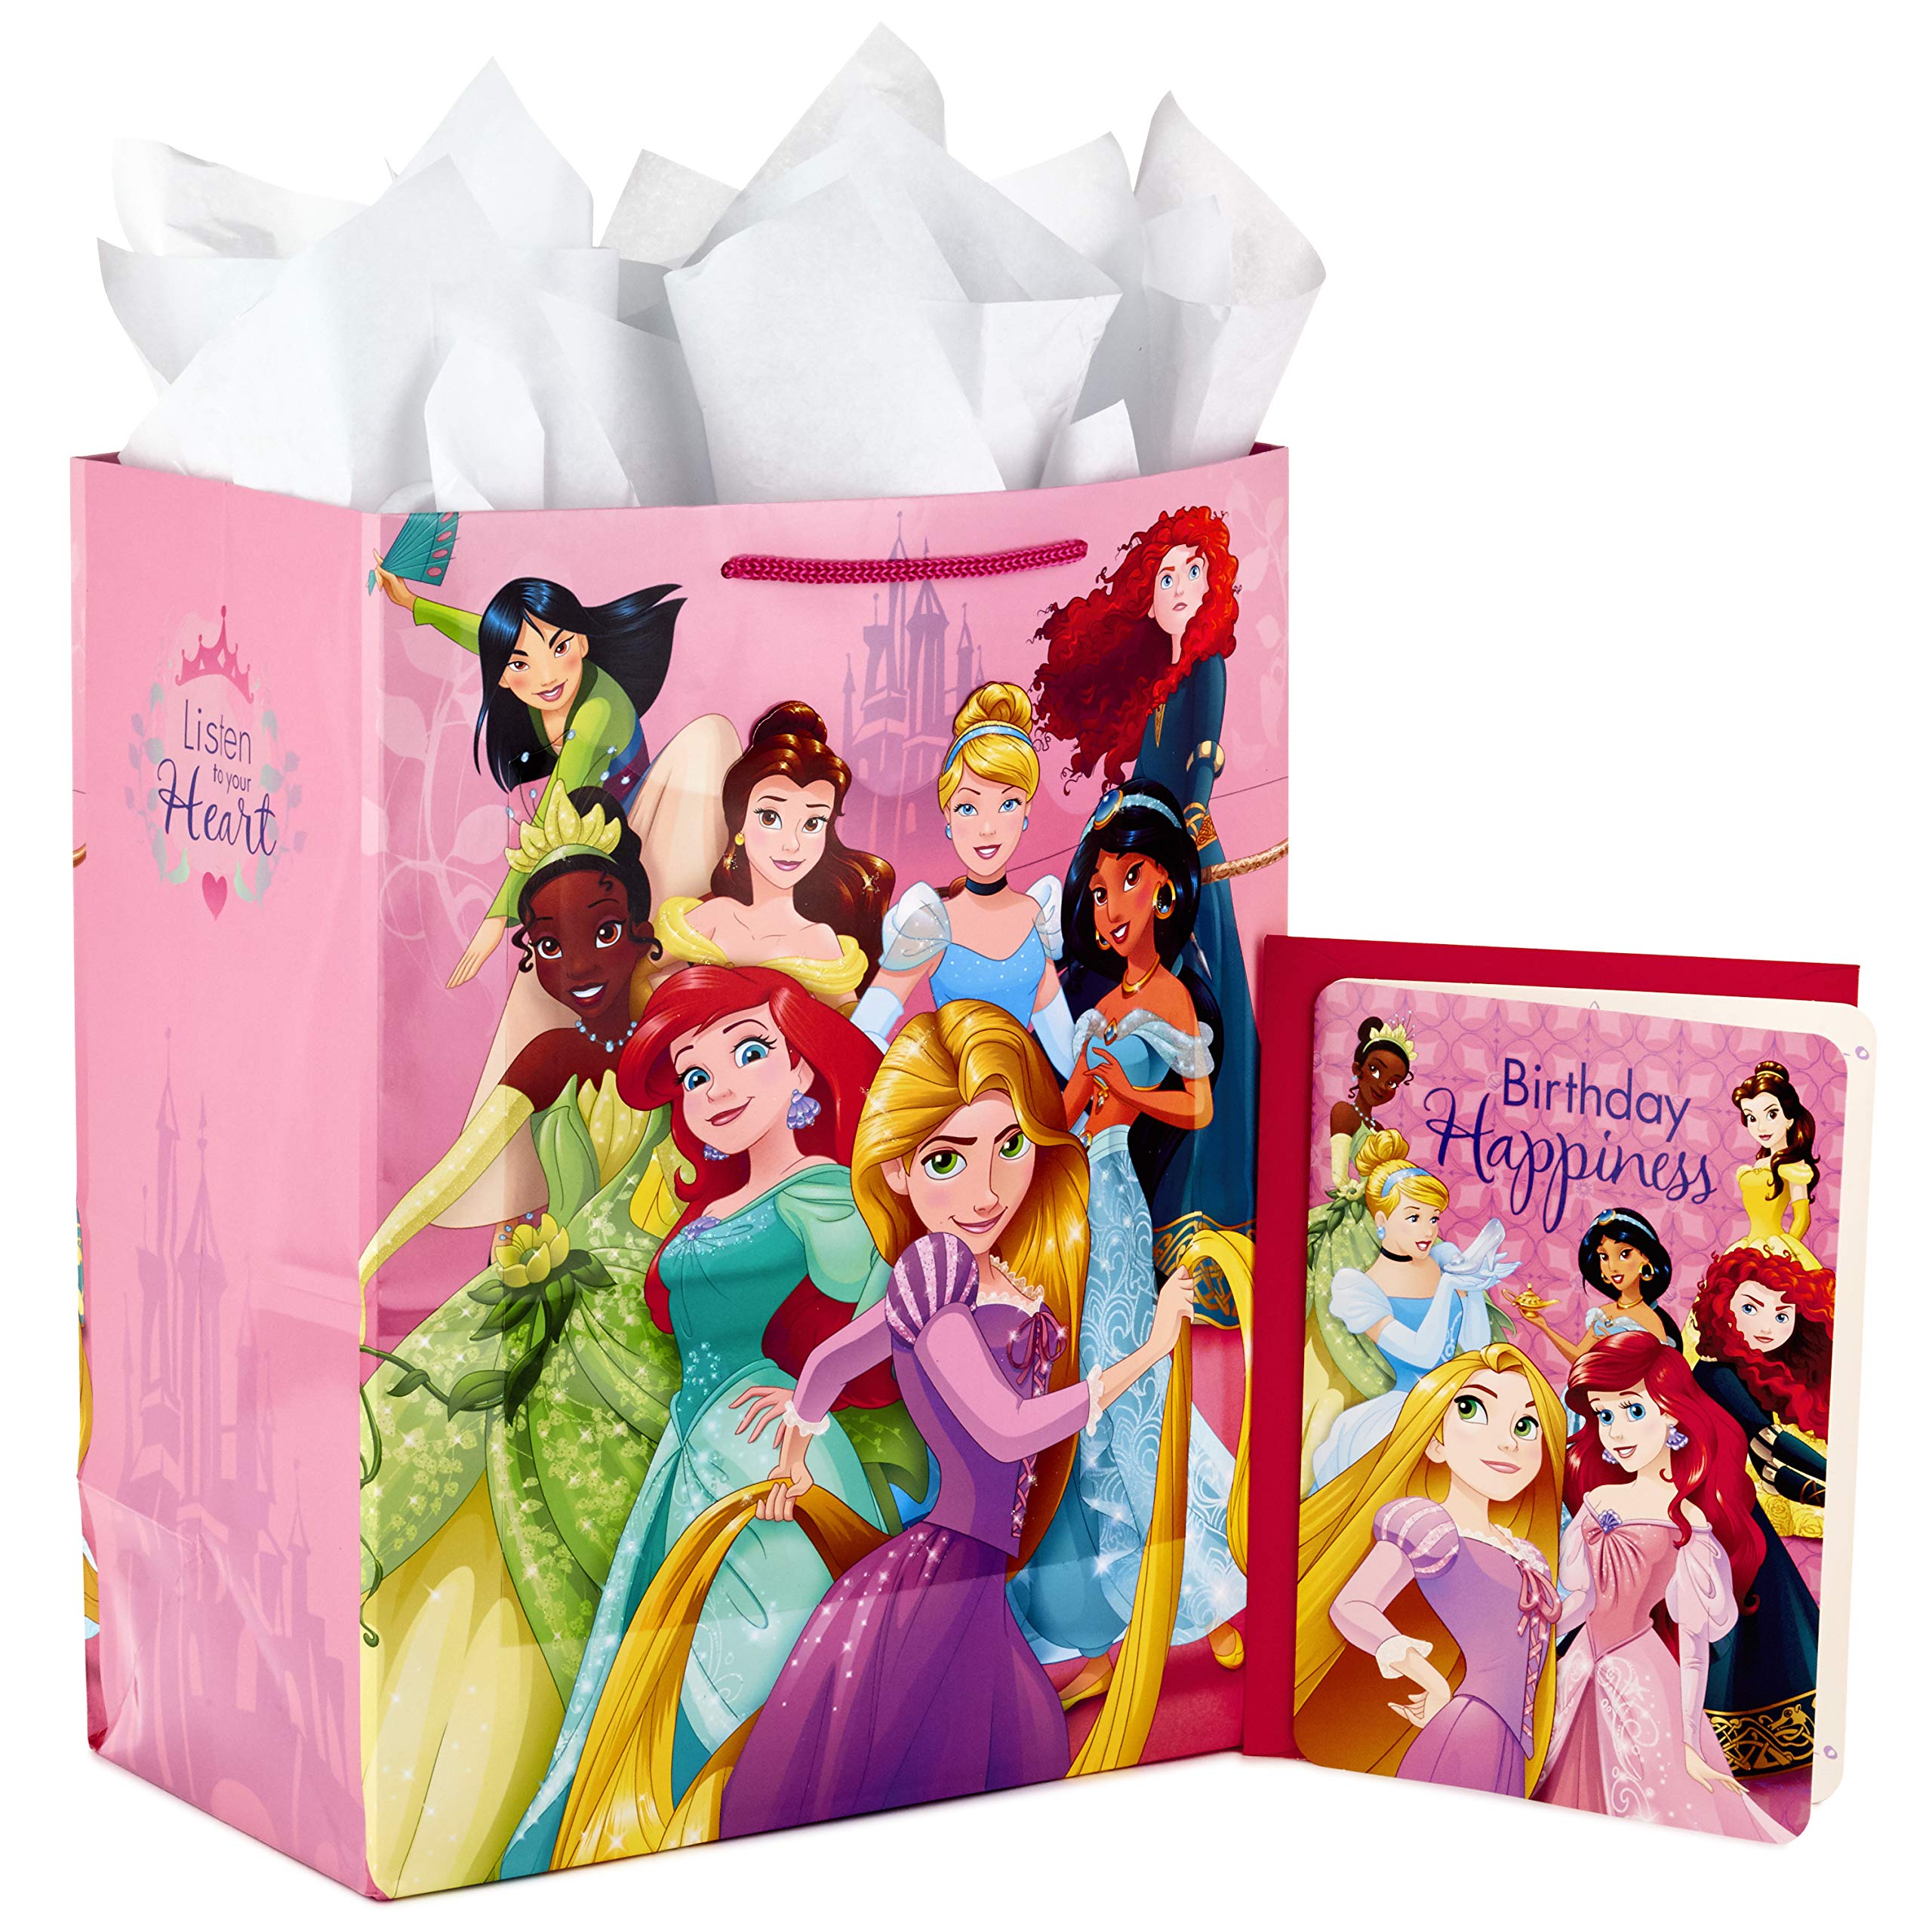 13" Hallmark Large Disney Princess Gift Bag w/ Birthday Card & Tissue Paper (Ariel, Belle, Rapunzel, Cinderella and More) $3.19 + Free Shipping w/ Prime or on $25+